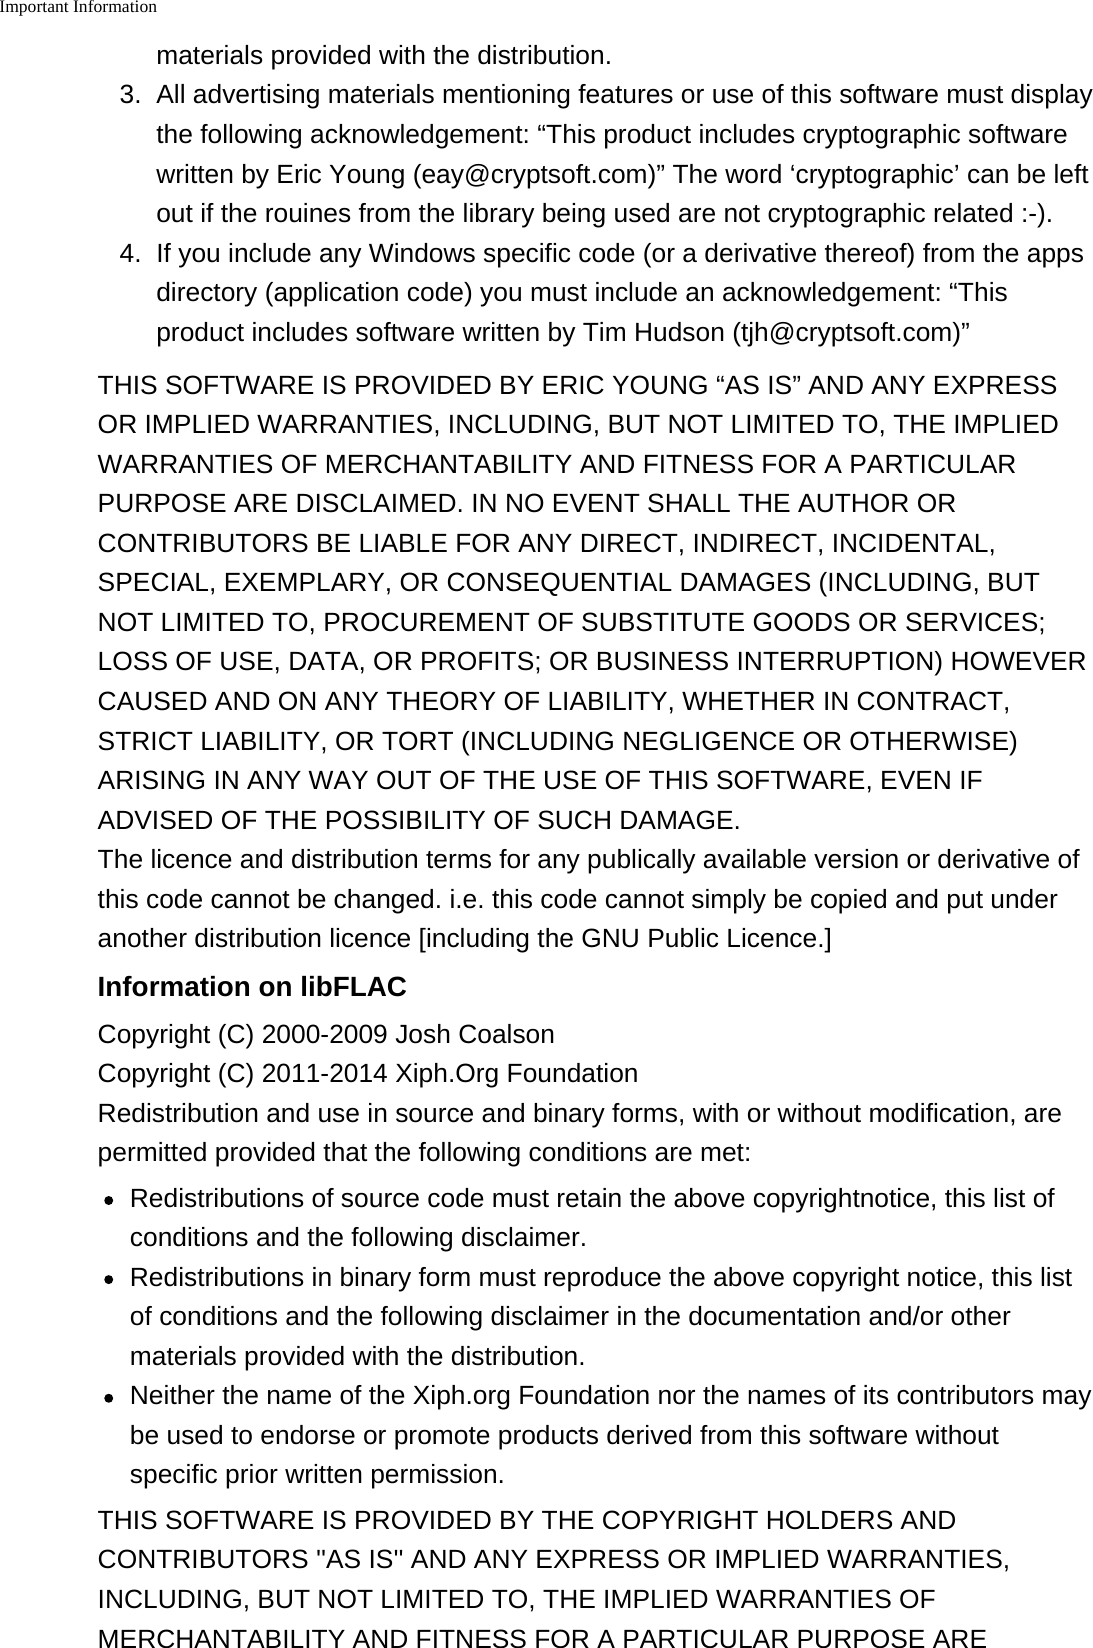 Important Informationmaterials provided with the distribution.3. All advertising materials mentioning features or use of this software must displaythe following acknowledgement: “This product includes cryptographic softwarewritten by Eric Young (eay@cryptsoft.com)” The word ‘cryptographic’ can be leftout if the rouines from the library being used are not cryptographic related :-).4. If you include any Windows specific code (or a derivative thereof) from the appsdirectory (application code) you must include an acknowledgement: “Thisproduct includes software written by Tim Hudson (tjh@cryptsoft.com)”THIS SOFTWARE IS PROVIDED BY ERIC YOUNG “AS IS” AND ANY EXPRESSOR IMPLIED WARRANTIES, INCLUDING, BUT NOT LIMITED TO, THE IMPLIEDWARRANTIES OF MERCHANTABILITY AND FITNESS FOR A PARTICULARPURPOSE ARE DISCLAIMED. IN NO EVENT SHALL THE AUTHOR ORCONTRIBUTORS BE LIABLE FOR ANY DIRECT, INDIRECT, INCIDENTAL,SPECIAL, EXEMPLARY, OR CONSEQUENTIAL DAMAGES (INCLUDING, BUTNOT LIMITED TO, PROCUREMENT OF SUBSTITUTE GOODS OR SERVICES;LOSS OF USE, DATA, OR PROFITS; OR BUSINESS INTERRUPTION) HOWEVERCAUSED AND ON ANY THEORY OF LIABILITY, WHETHER IN CONTRACT,STRICT LIABILITY, OR TORT (INCLUDING NEGLIGENCE OR OTHERWISE)ARISING IN ANY WAY OUT OF THE USE OF THIS SOFTWARE, EVEN IFADVISED OF THE POSSIBILITY OF SUCH DAMAGE.The licence and distribution terms for any publically available version or derivative ofthis code cannot be changed. i.e. this code cannot simply be copied and put underanother distribution licence [including the GNU Public Licence.]Information on libFLACCopyright (C) 2000-2009 Josh Coalson Copyright (C) 2011-2014 Xiph.Org FoundationRedistribution and use in source and binary forms, with or without modification, arepermitted provided that the following conditions are met:Redistributions of source code must retain the above copyrightnotice, this list ofconditions and the following disclaimer.Redistributions in binary form must reproduce the above copyright notice, this listof conditions and the following disclaimer in the documentation and/or othermaterials provided with the distribution.Neither the name of the Xiph.org Foundation nor the names of its contributors maybe used to endorse or promote products derived from this software withoutspecific prior written permission.THIS SOFTWARE IS PROVIDED BY THE COPYRIGHT HOLDERS ANDCONTRIBUTORS &apos;&apos;AS IS&apos;&apos; AND ANY EXPRESS OR IMPLIED WARRANTIES,INCLUDING, BUT NOT LIMITED TO, THE IMPLIED WARRANTIES OFMERCHANTABILITY AND FITNESS FOR A PARTICULAR PURPOSE ARE